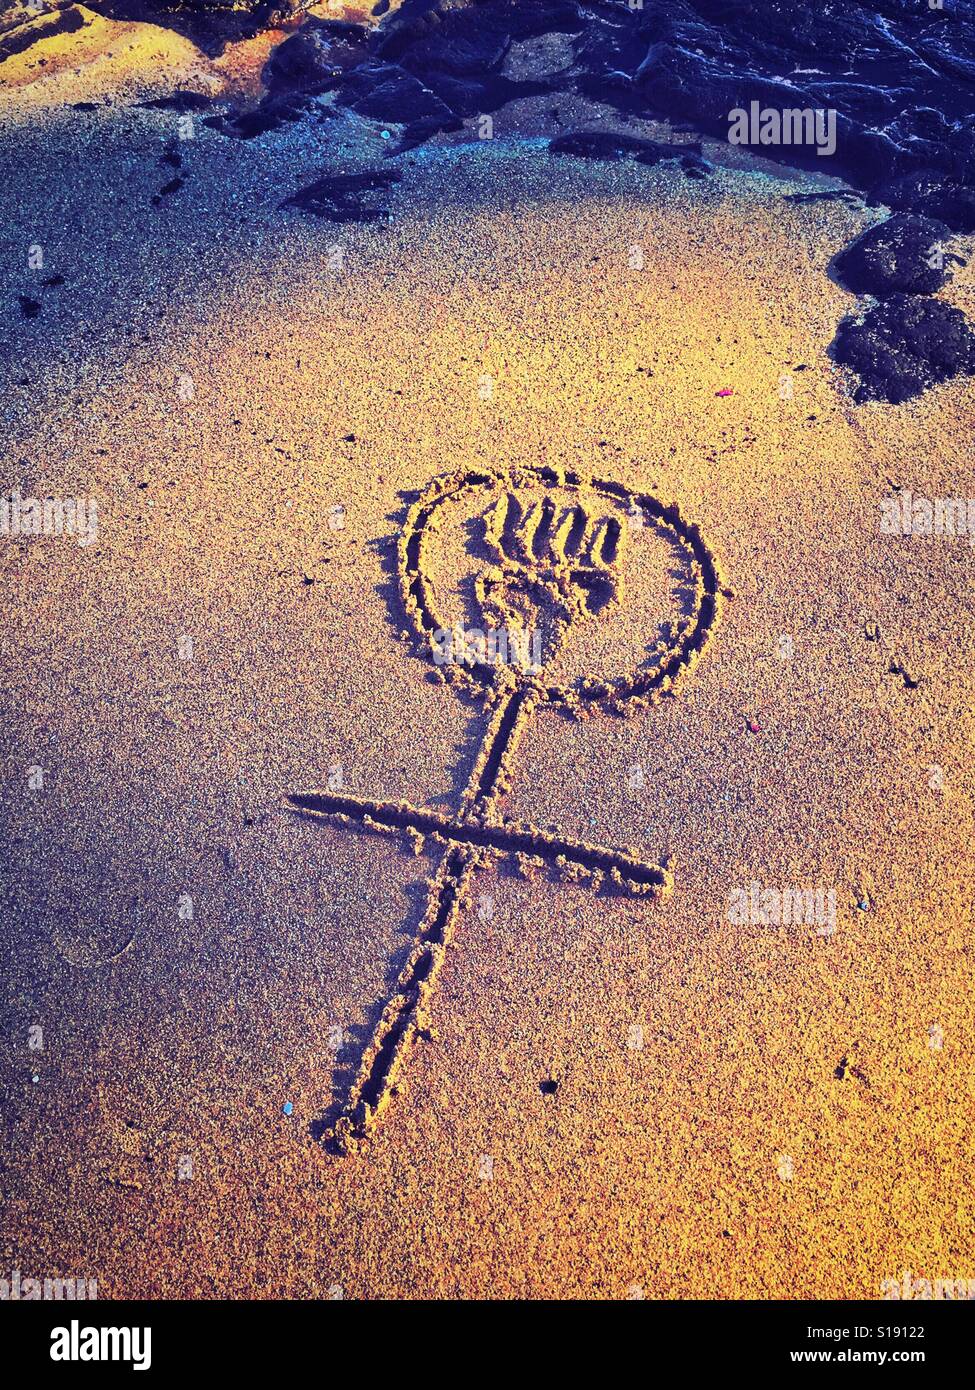 A symbolic stick figure of a woman with power is drawn in the sand. Stock Photo